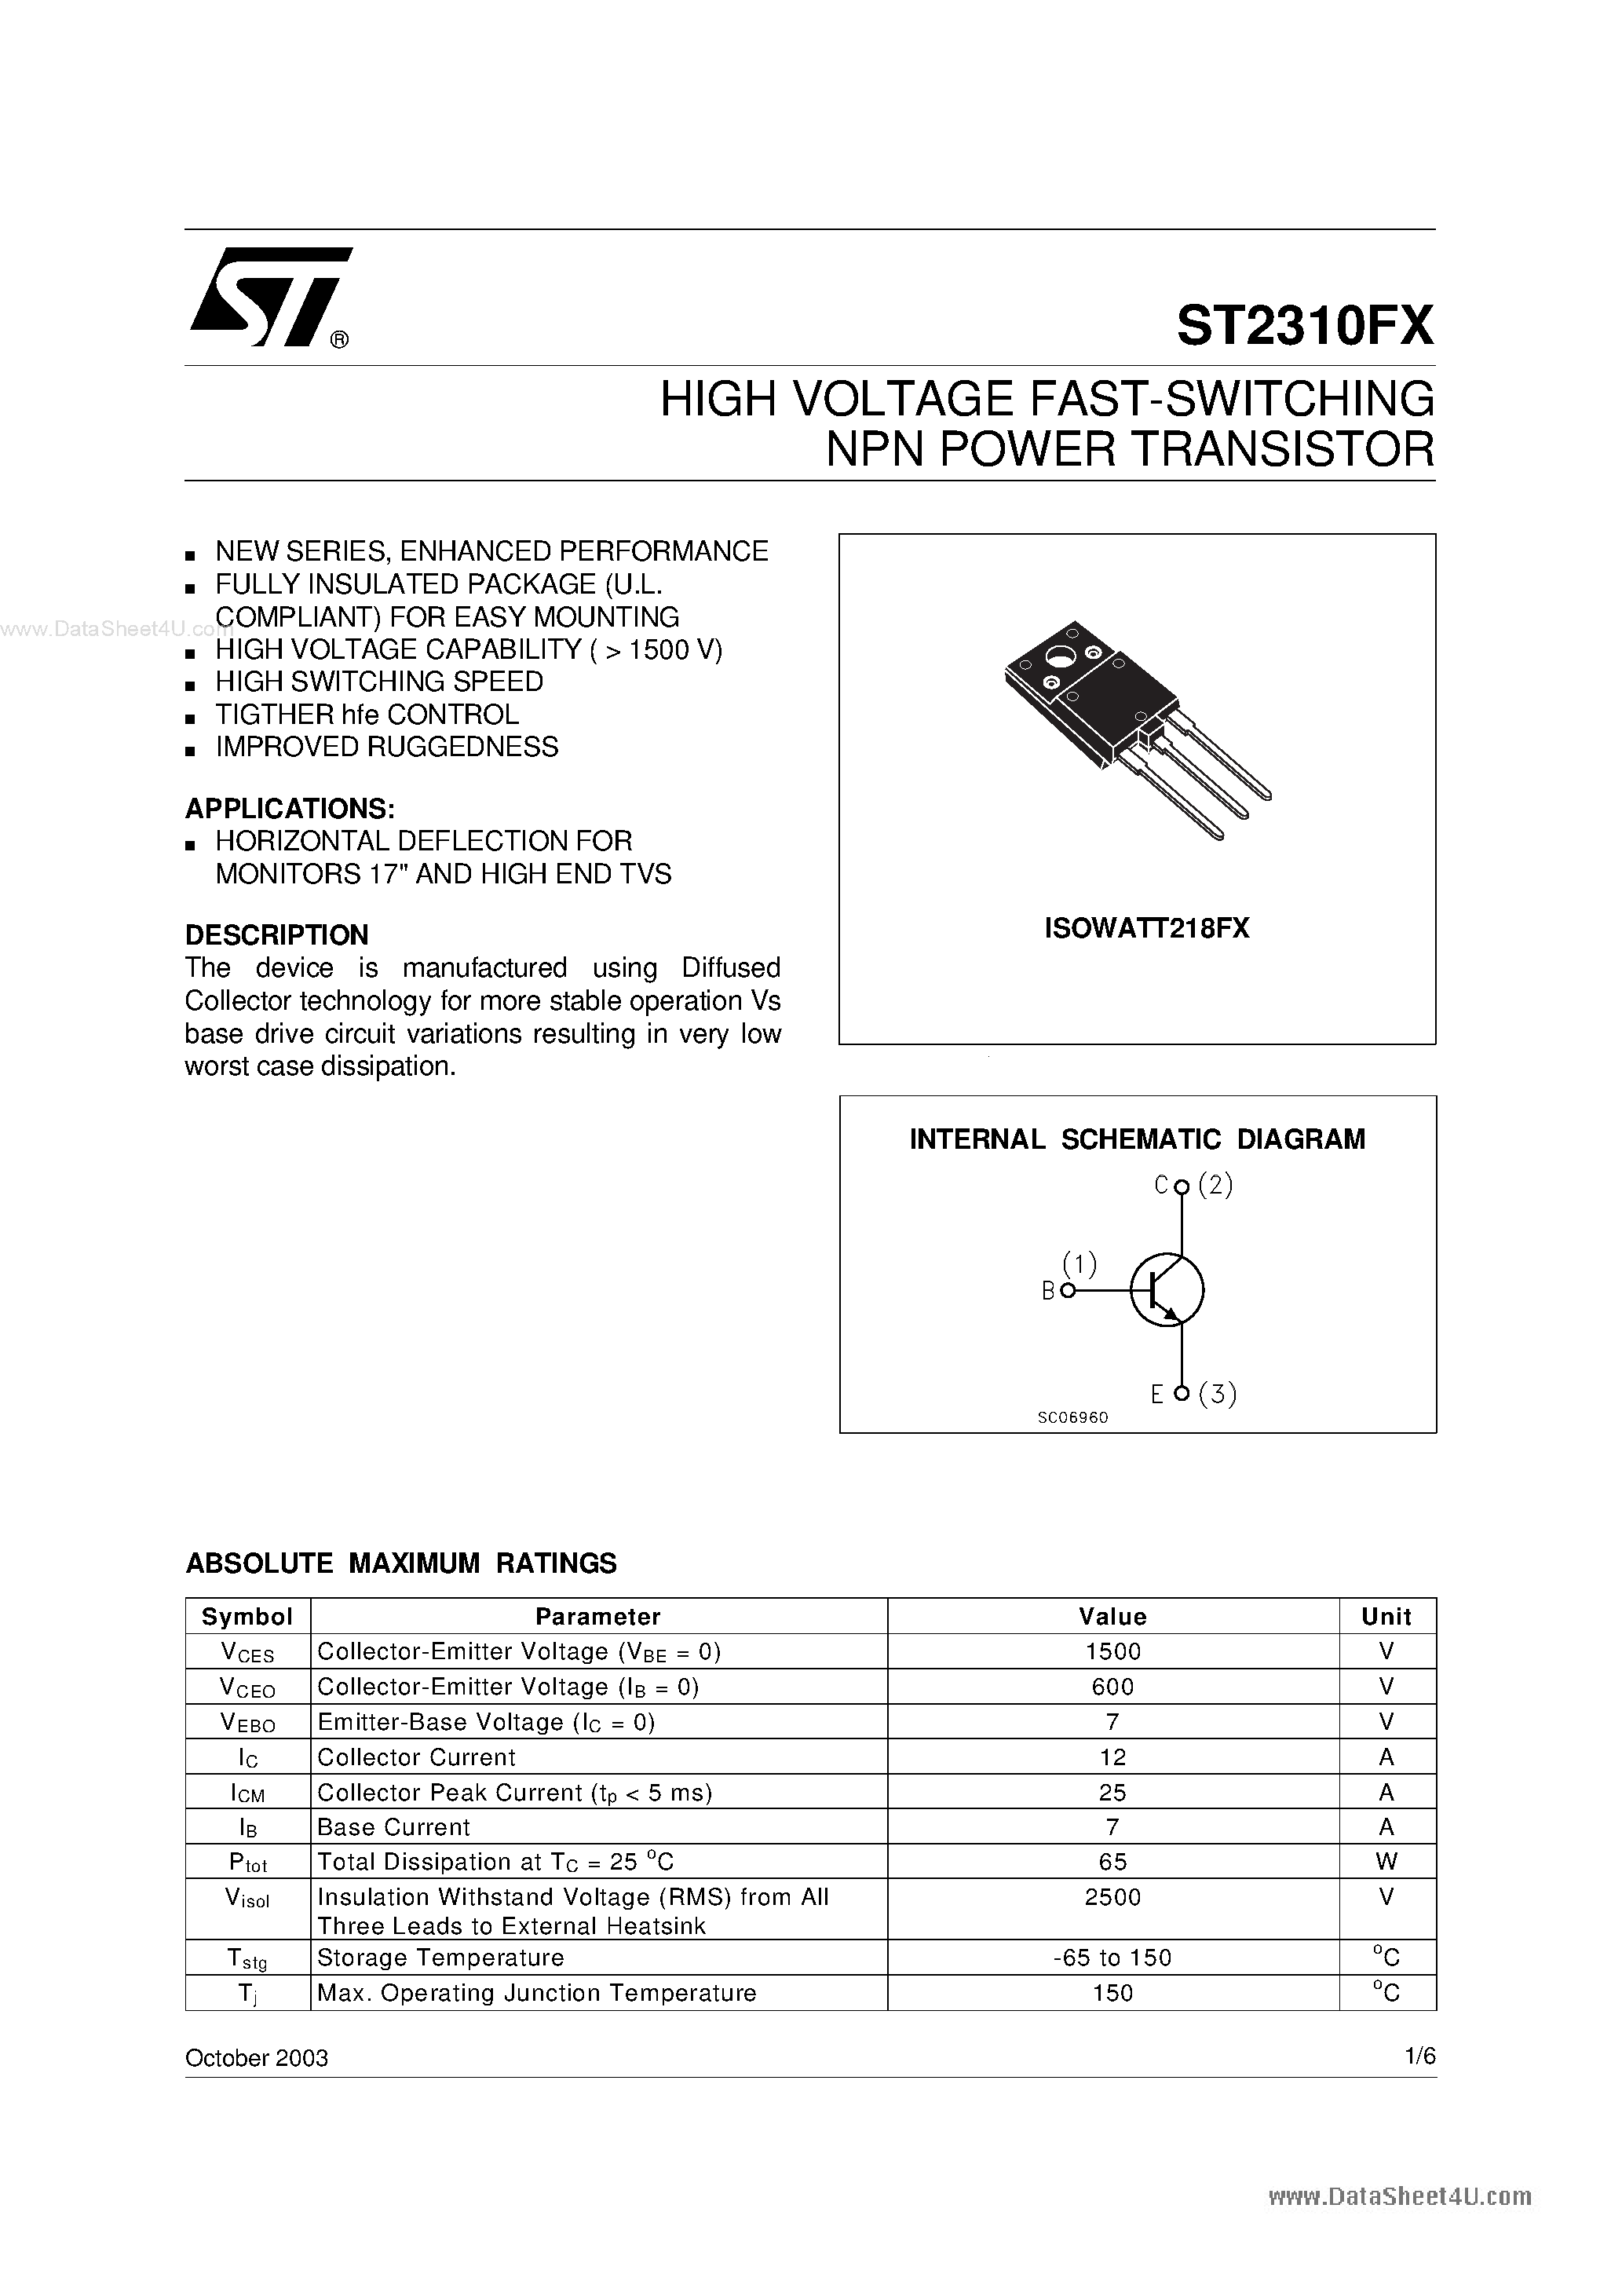 Datasheet 2310FX - Search -----> ST2310FX page 1